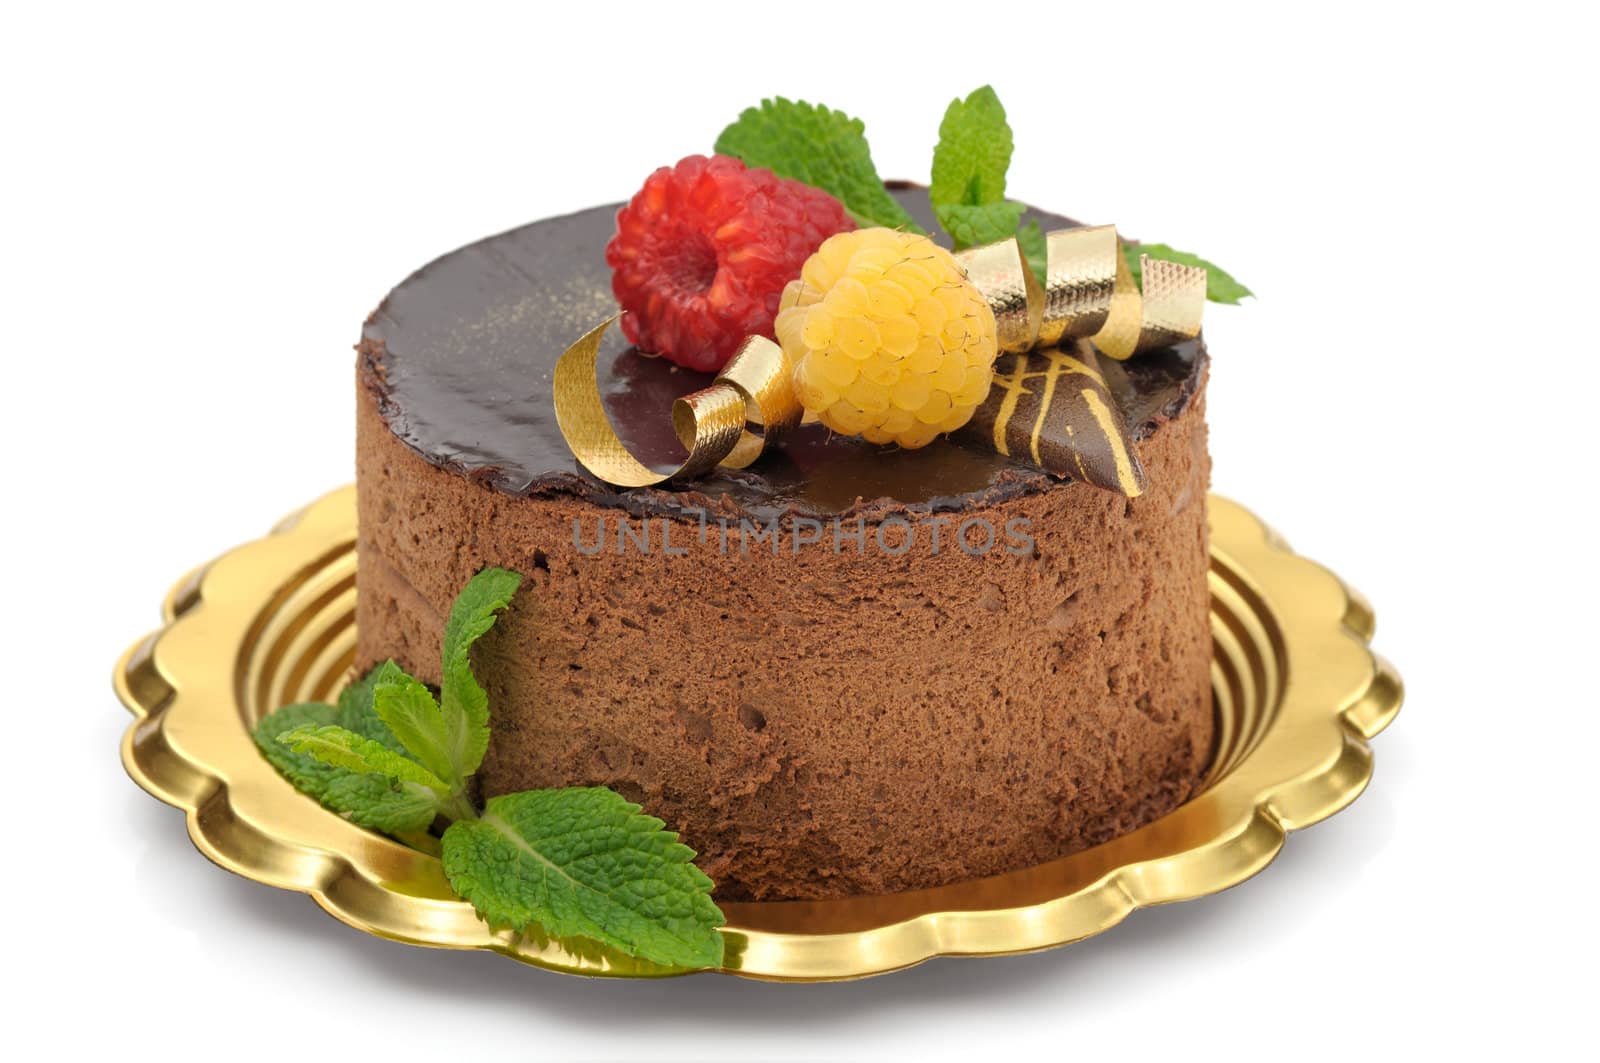 Chocolate mousse cake decorated with raspberries and mint leaves on white background